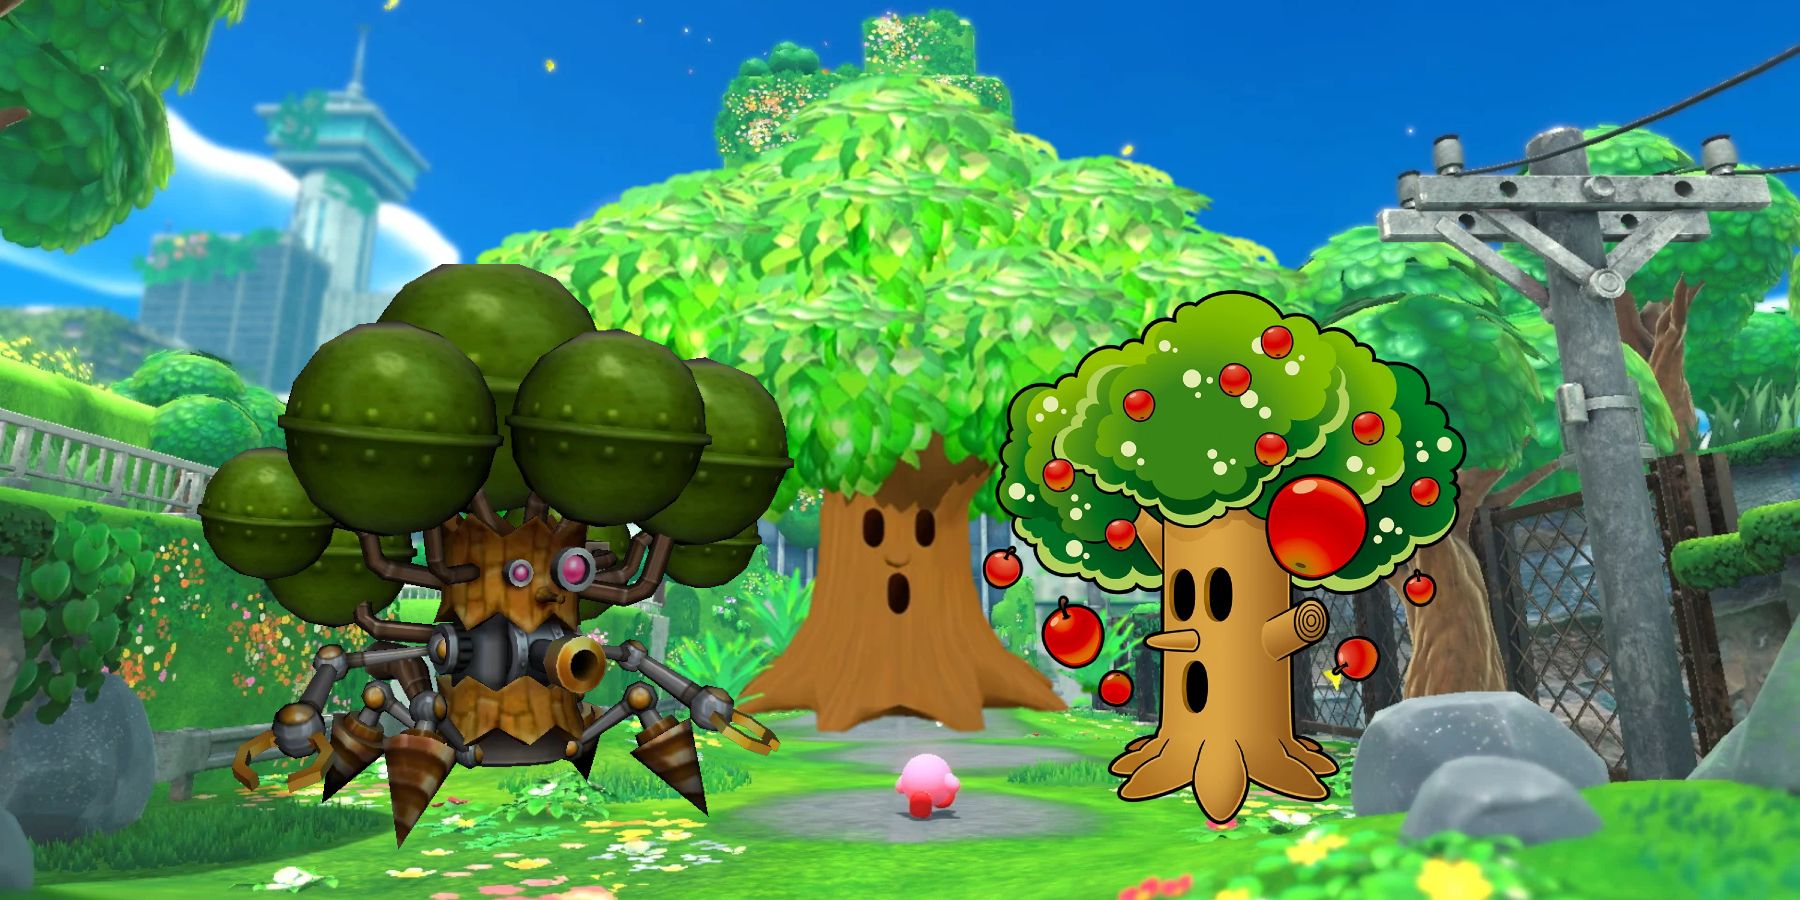 Kirby and the Forgotten Land: Whispy Woods Needs a Radical Redesign